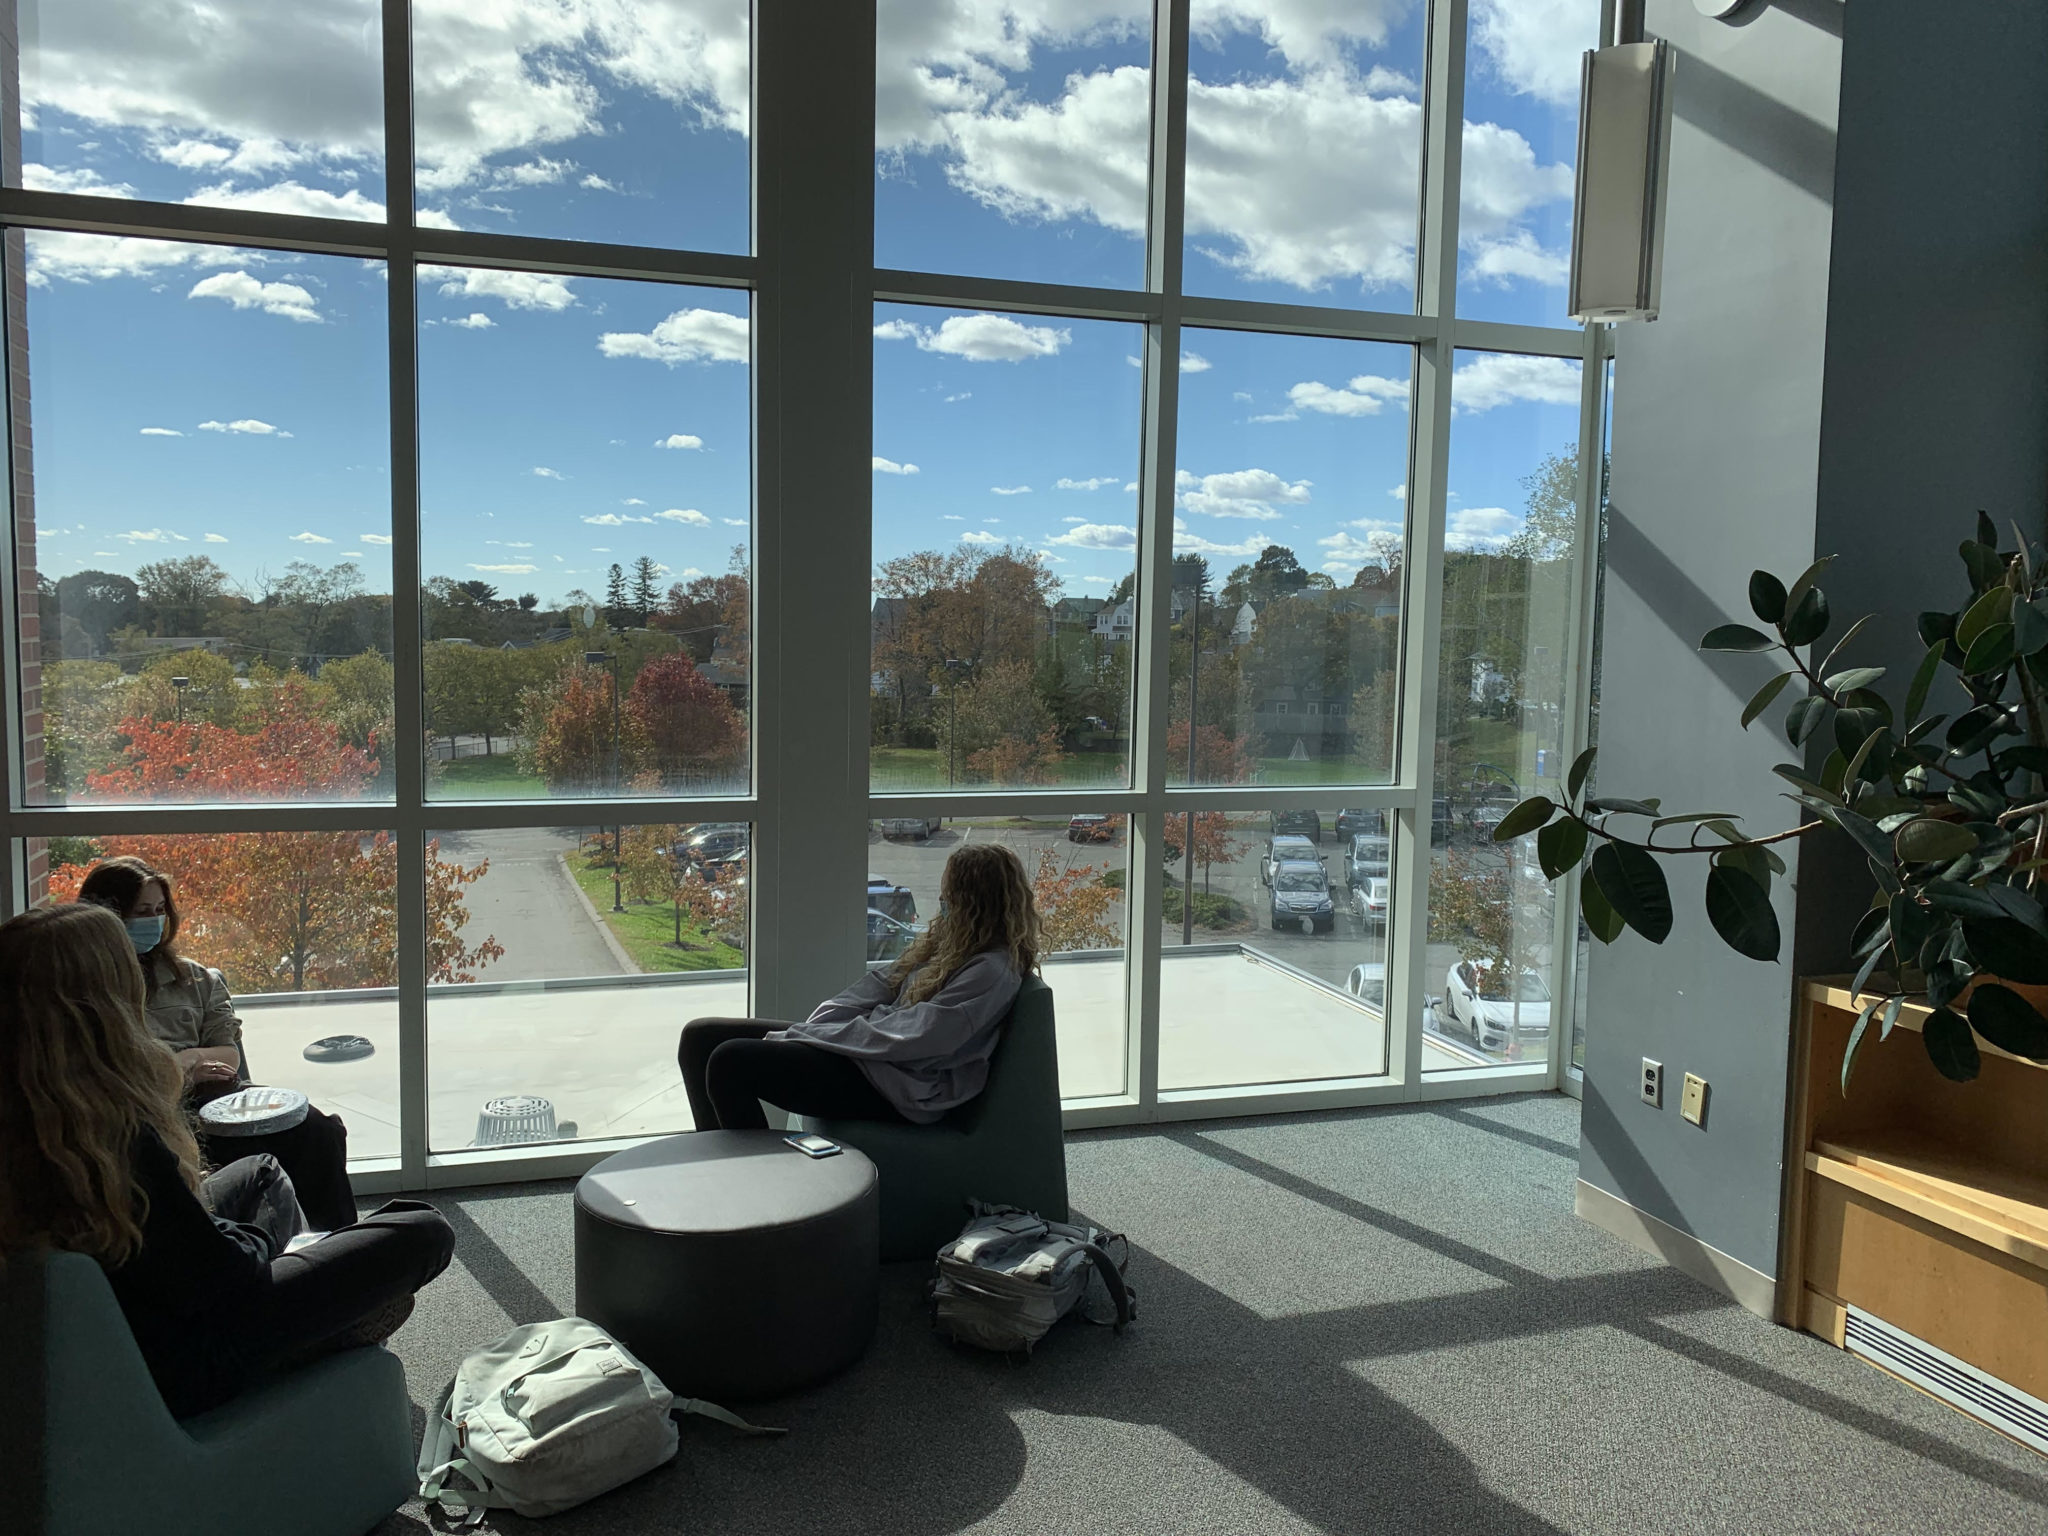 Students in library in front of windows in cozy seating